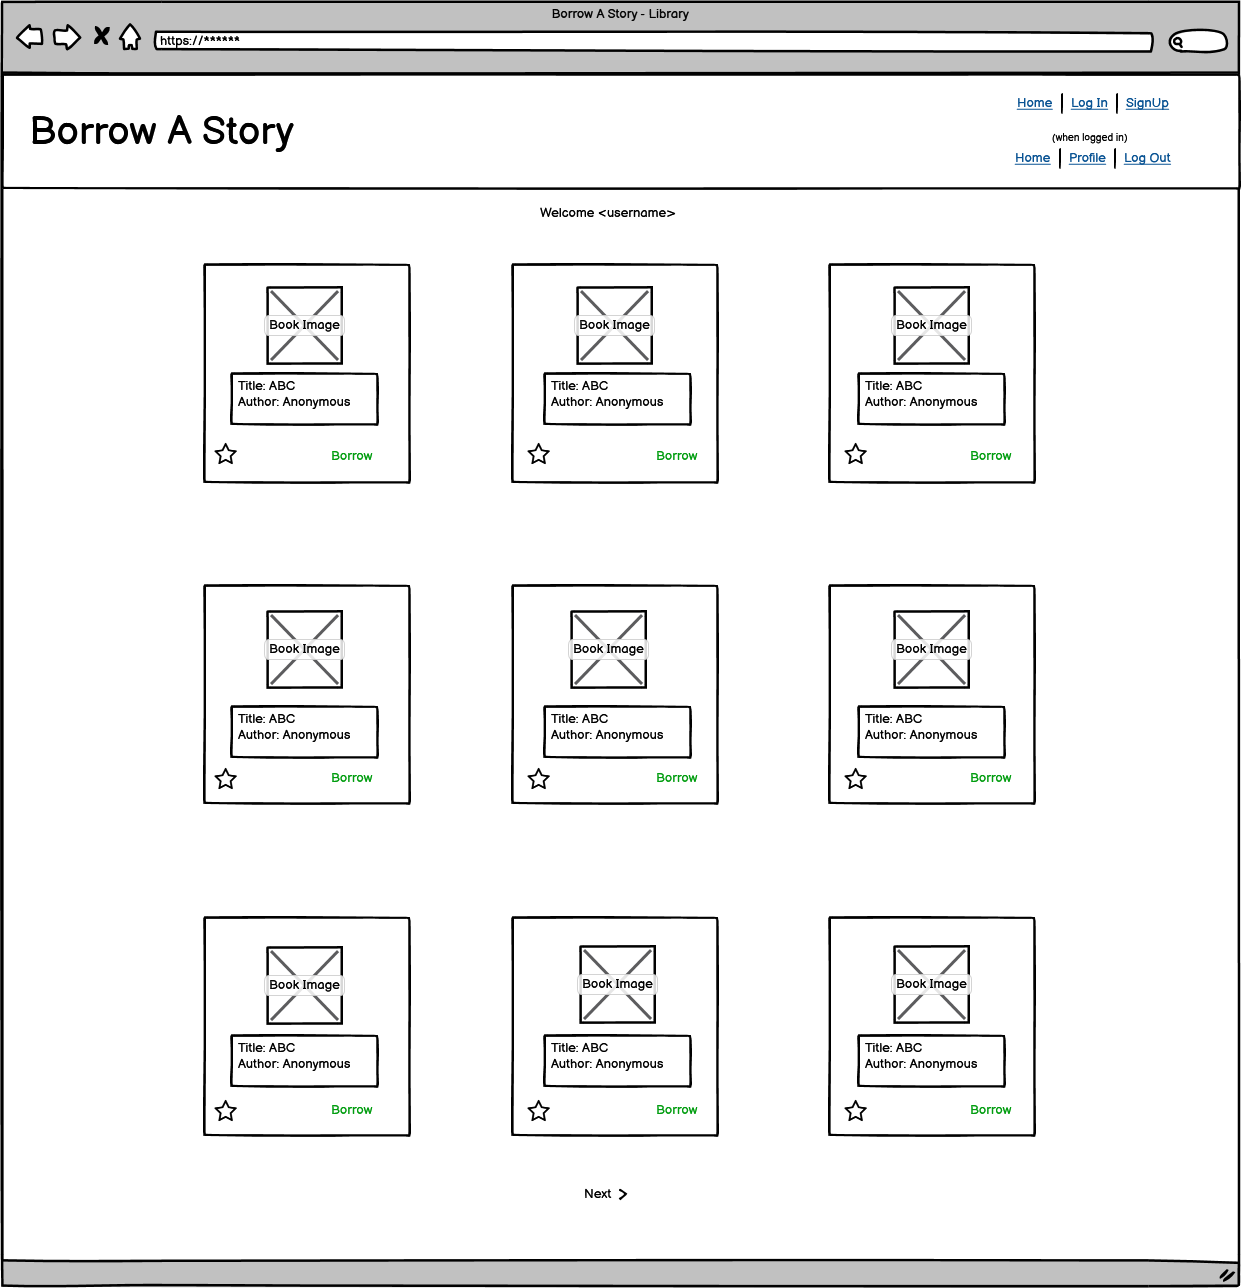 Wireframe of the homepage